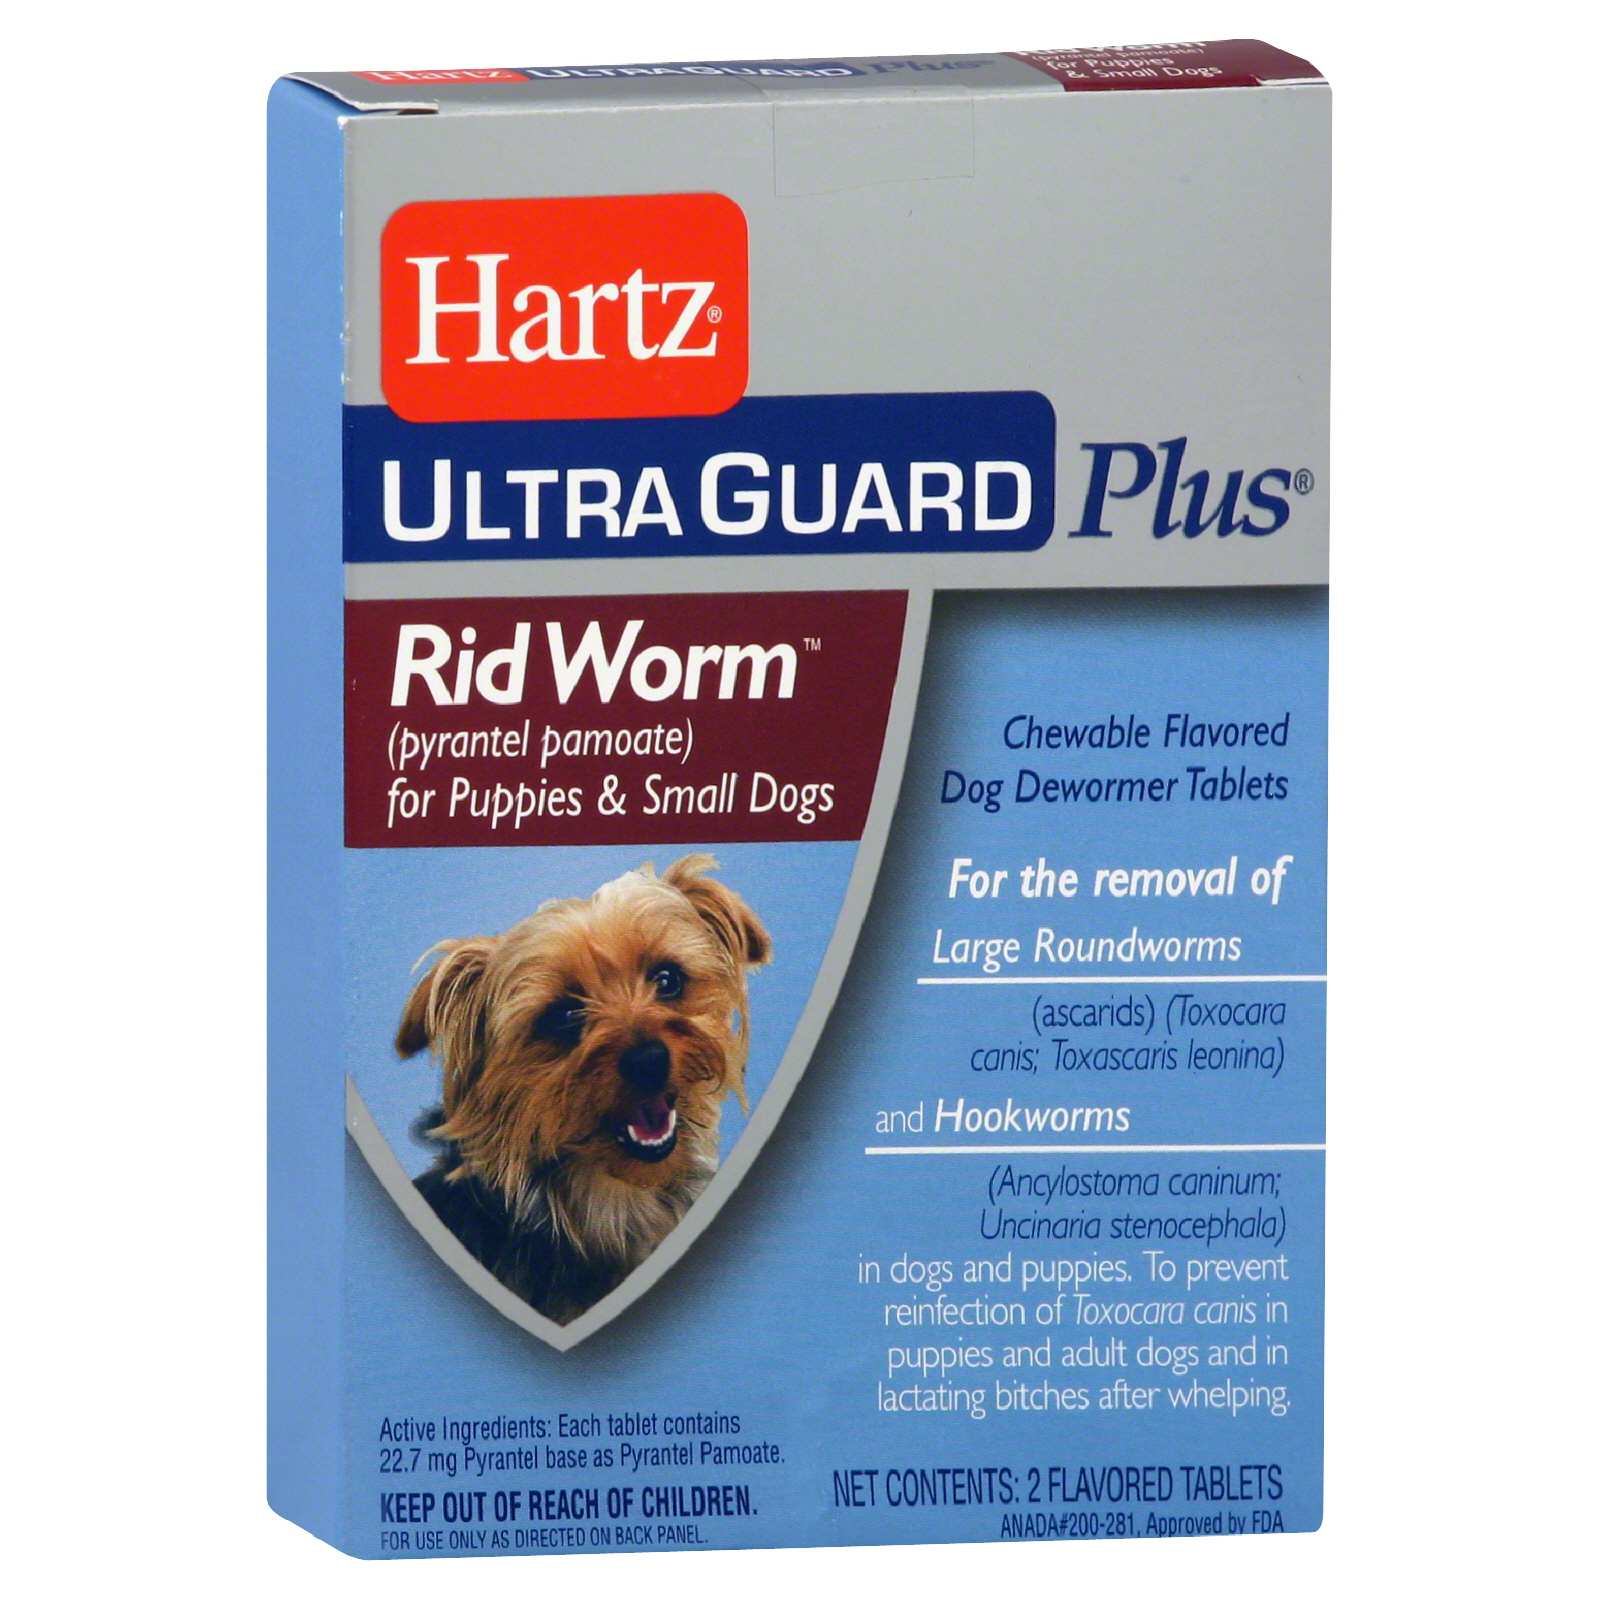 Hartz Ultra Guard Plus RidWorm Dog Dewormer Tablets, for Puppies & Small Dogs, Chewable Flavored, 2 tablets